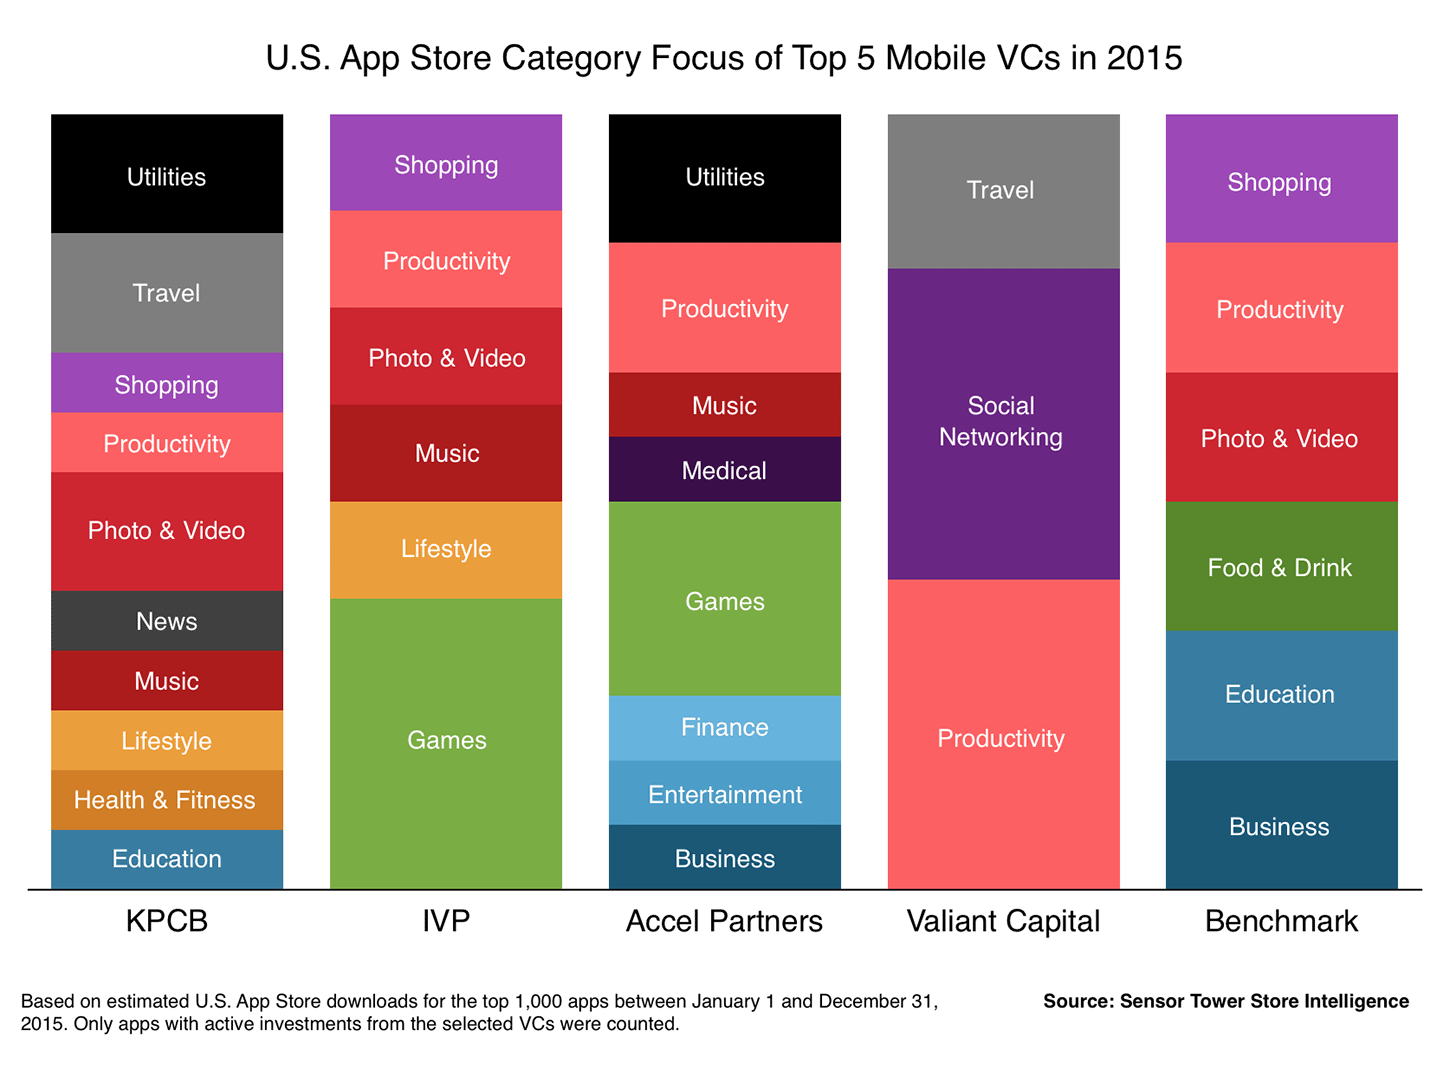 Chart Showing Category Breakdown of Top 5 Mobile VCs Apps